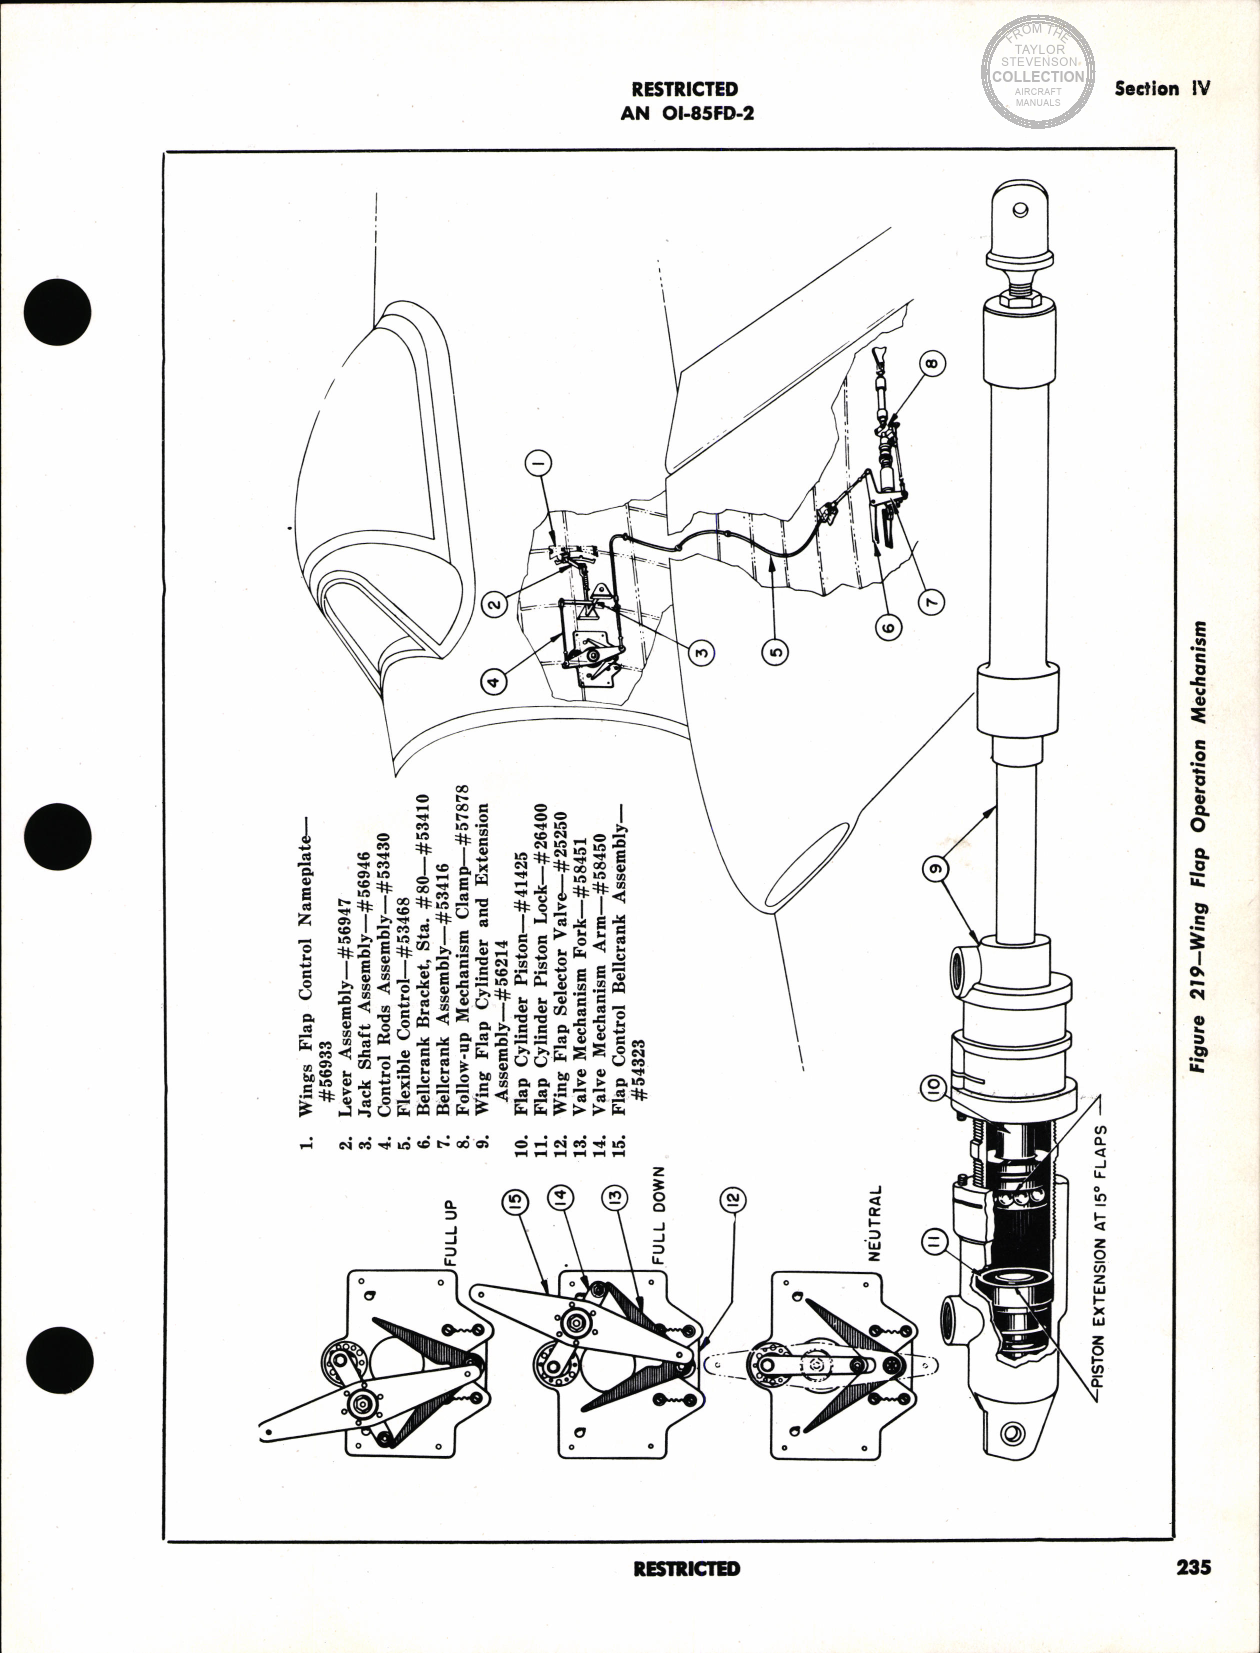 Sample page 296 from AirCorps Library document: Erection & Maintenance - F8F 